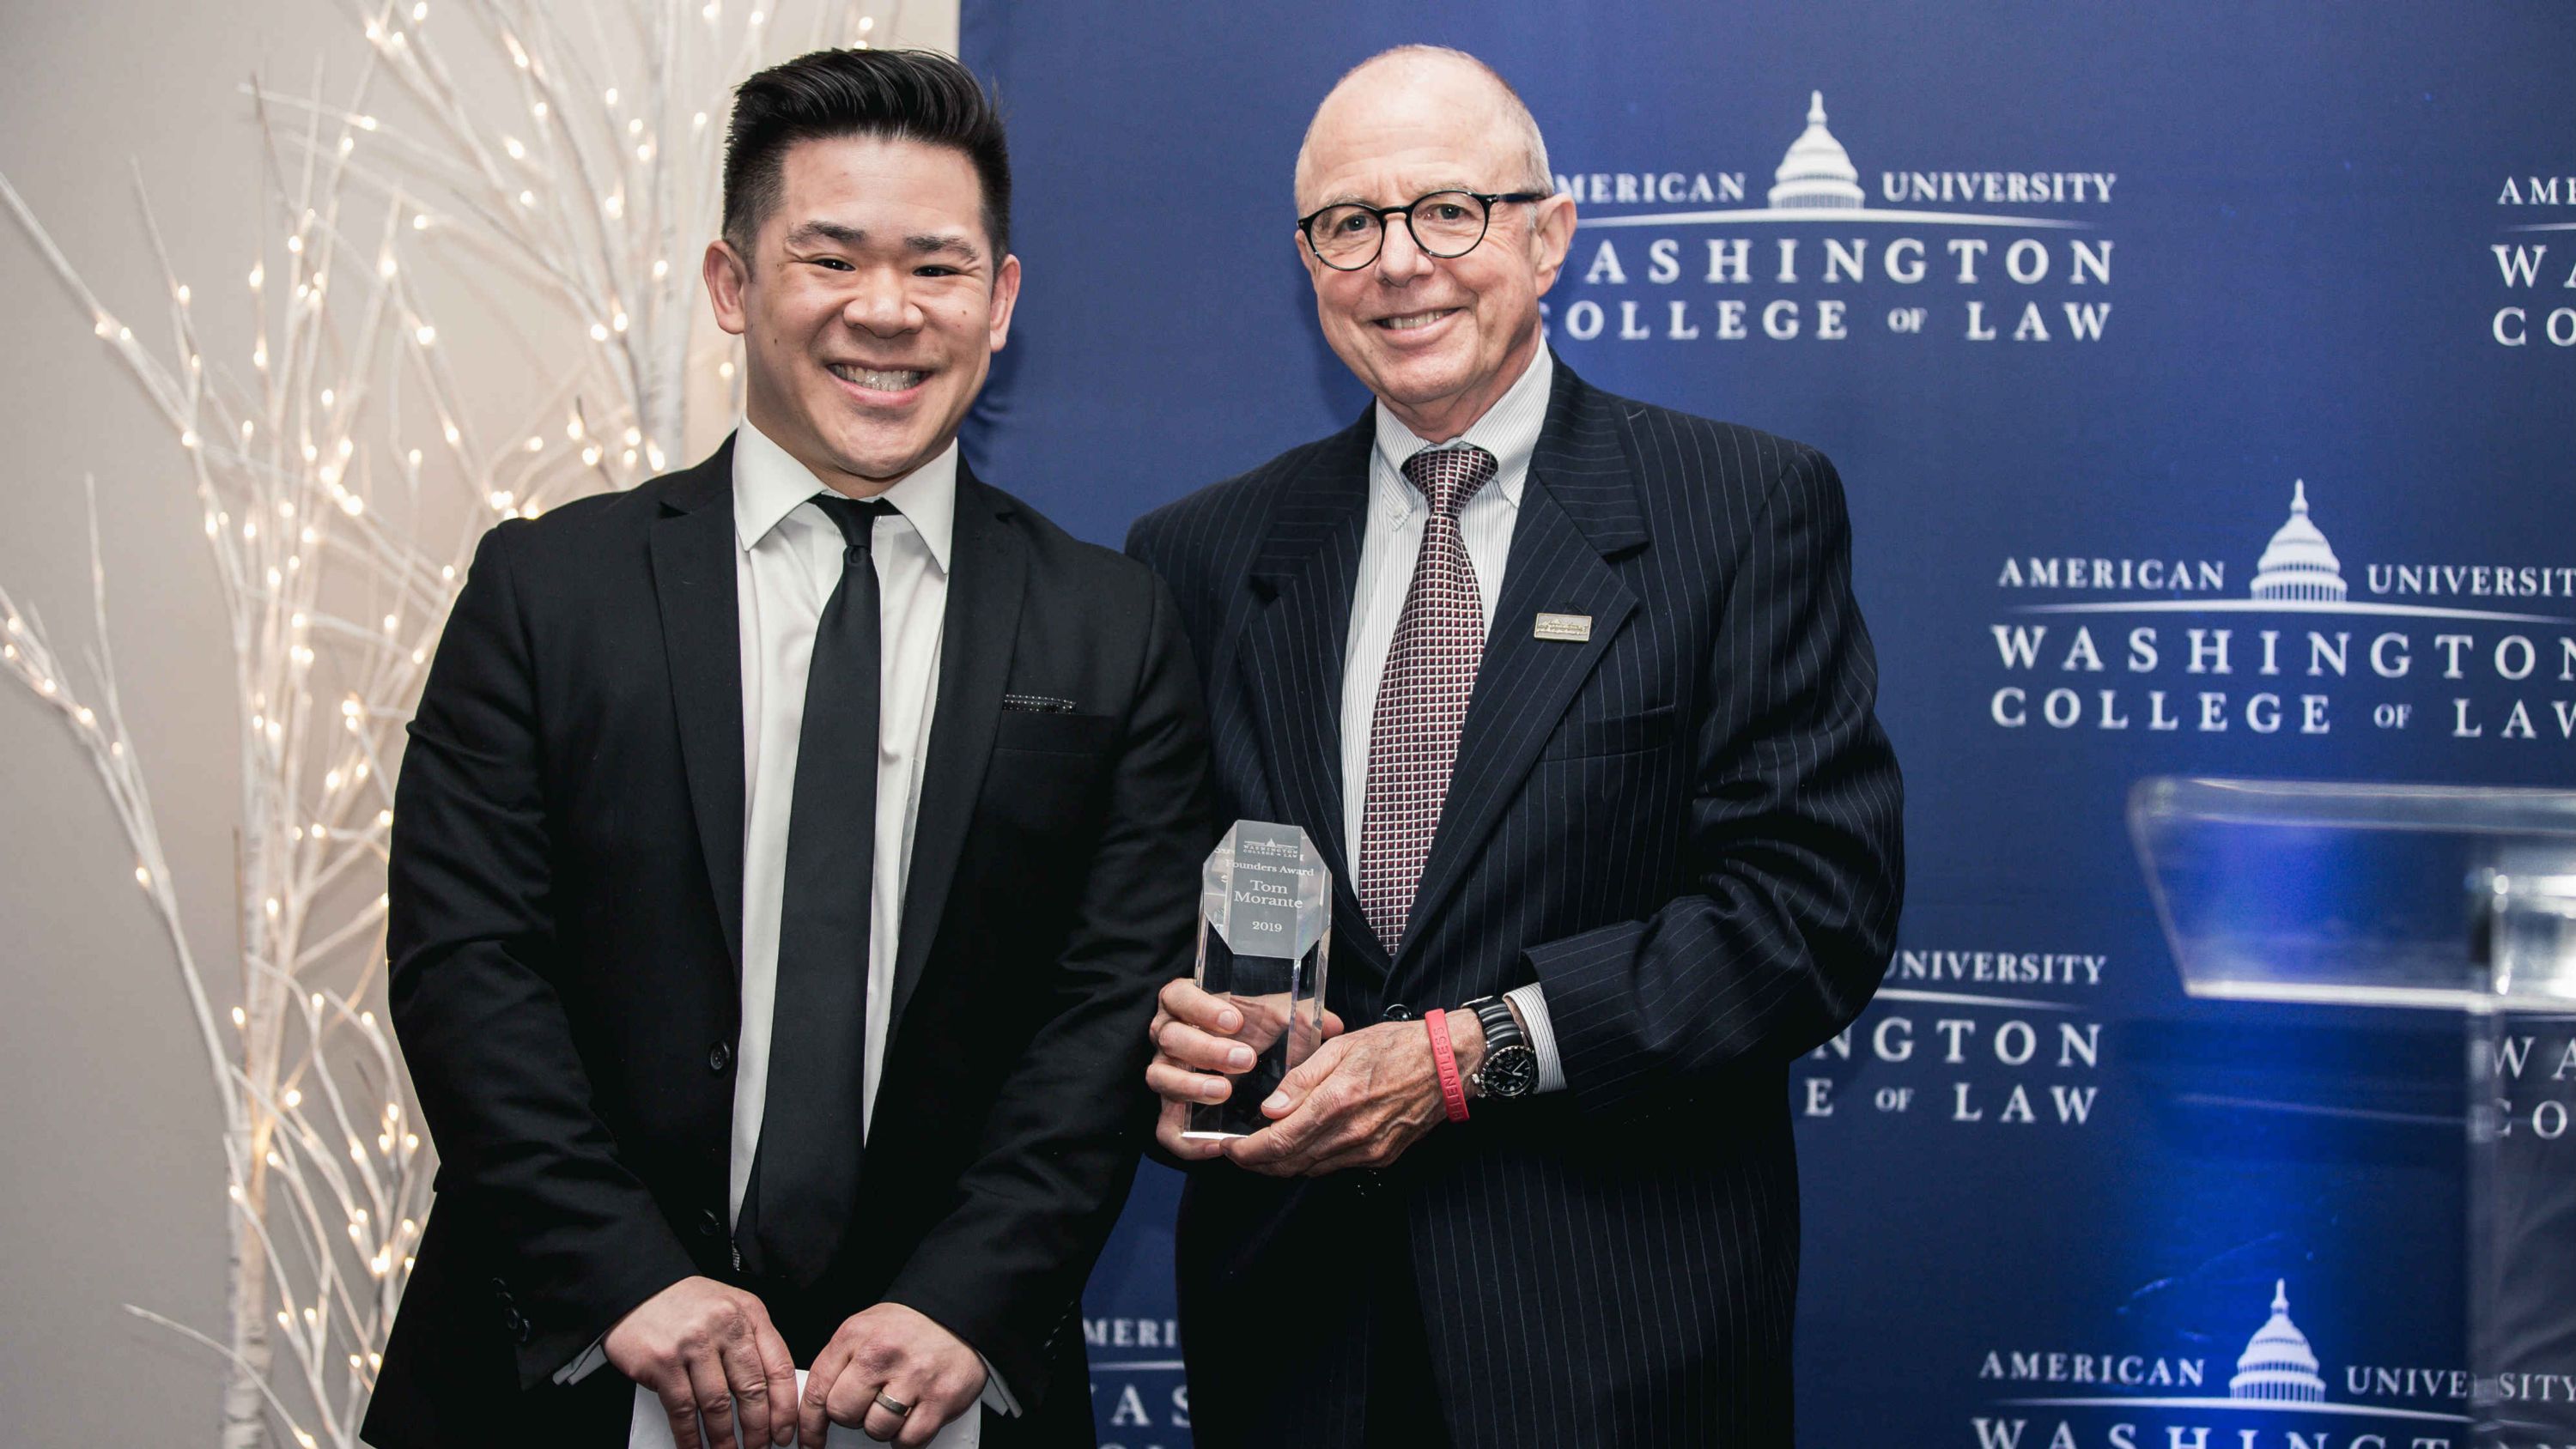 Myers Society Chair Tom Morante ’77 is presented with the Founders Award by incoming Myers Society Chair Eric Huang ’05.